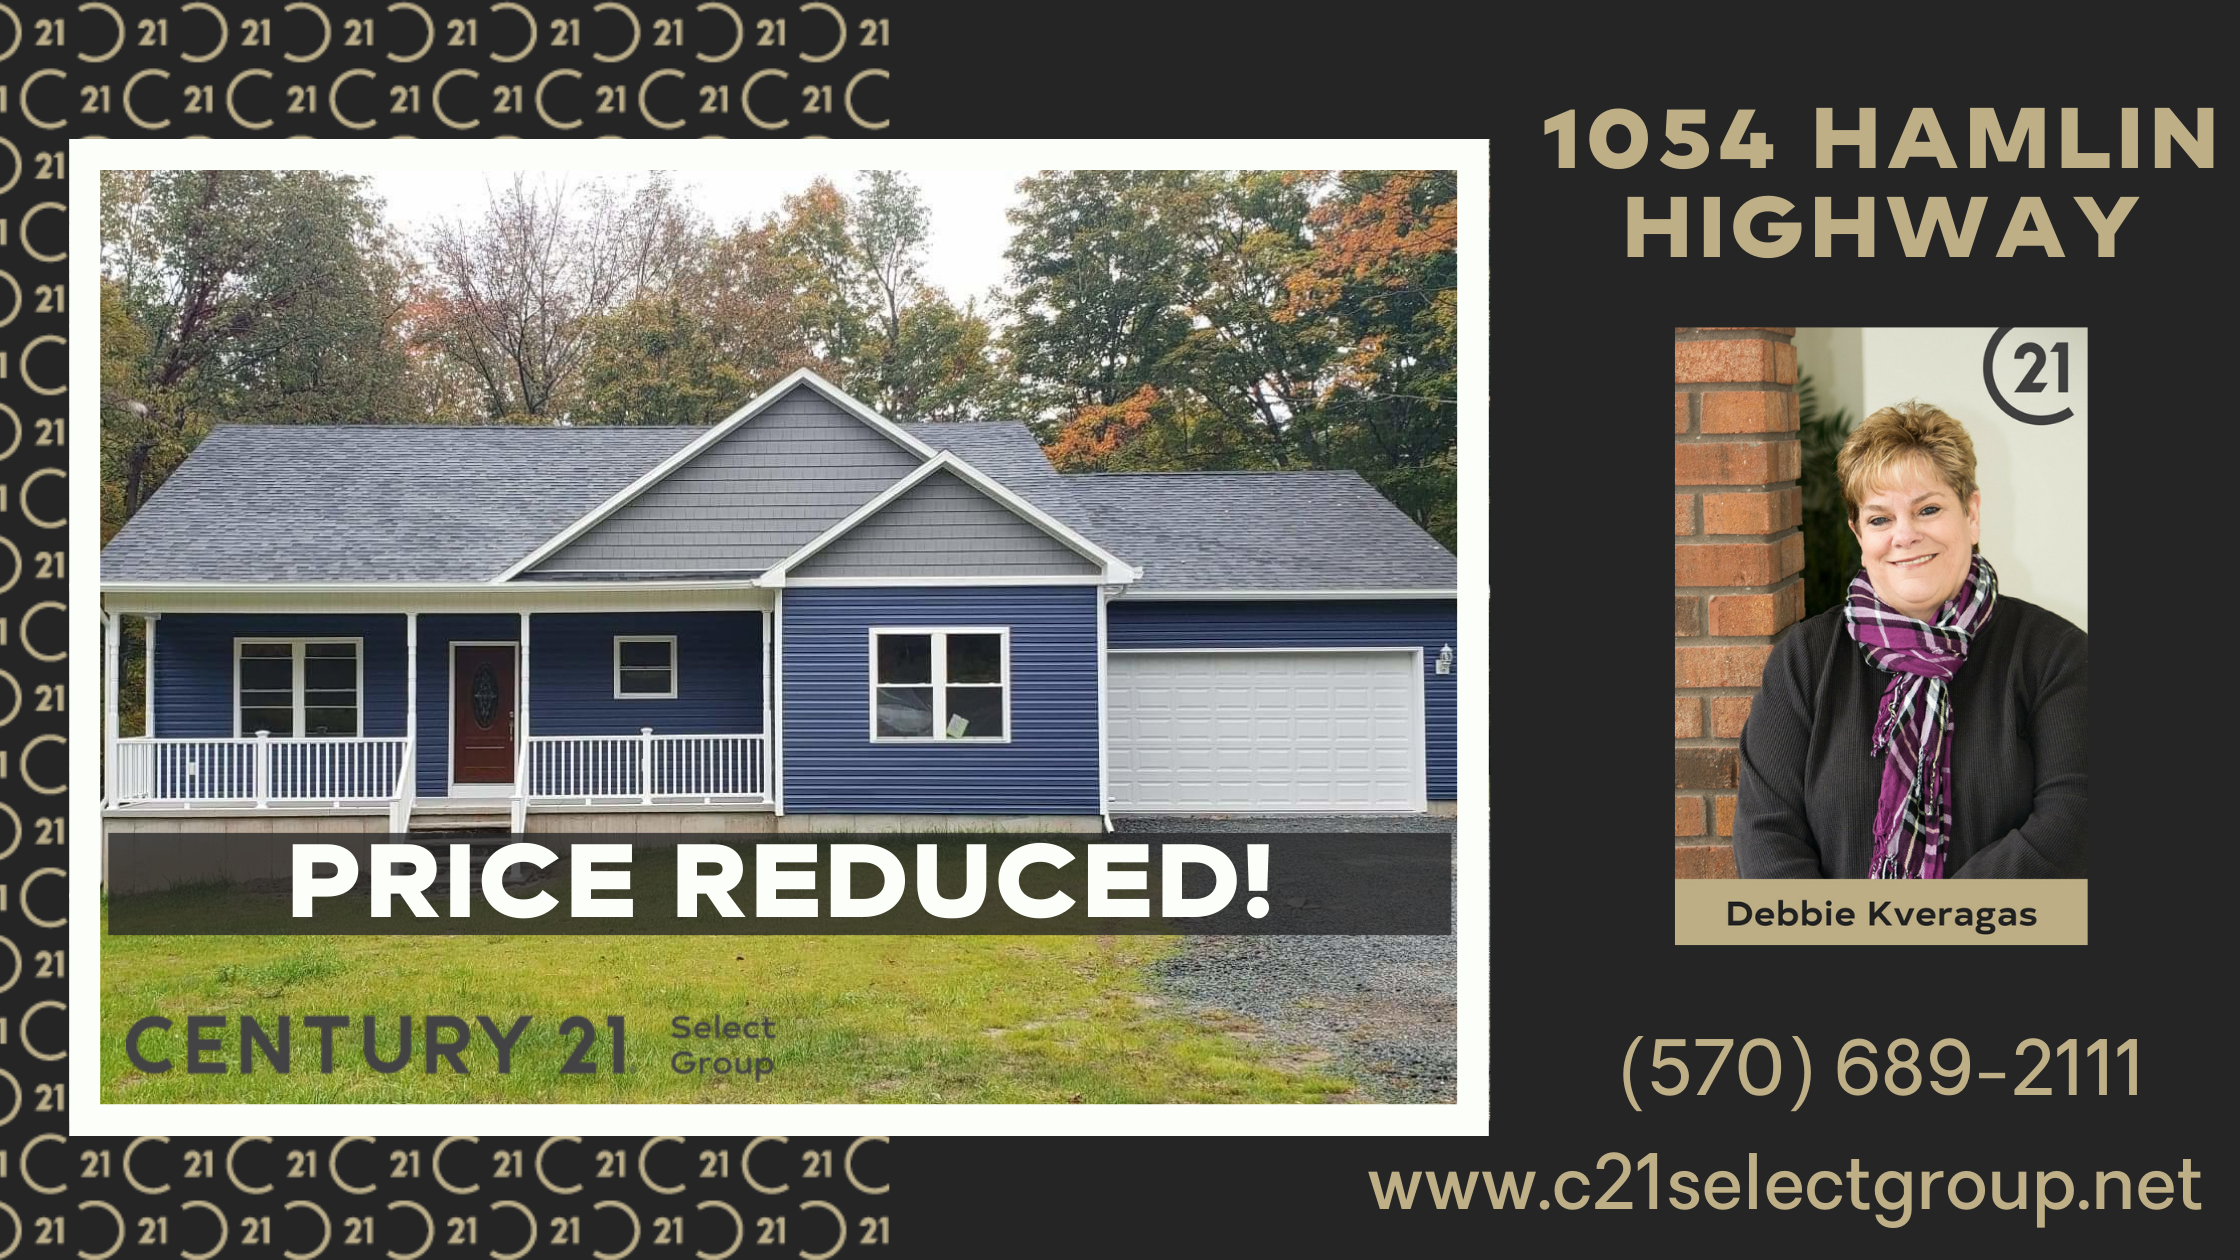 PRICE REDUCED! 1054 Hamlin Hwy: Brand New Ranch Home on 2.82 Acres